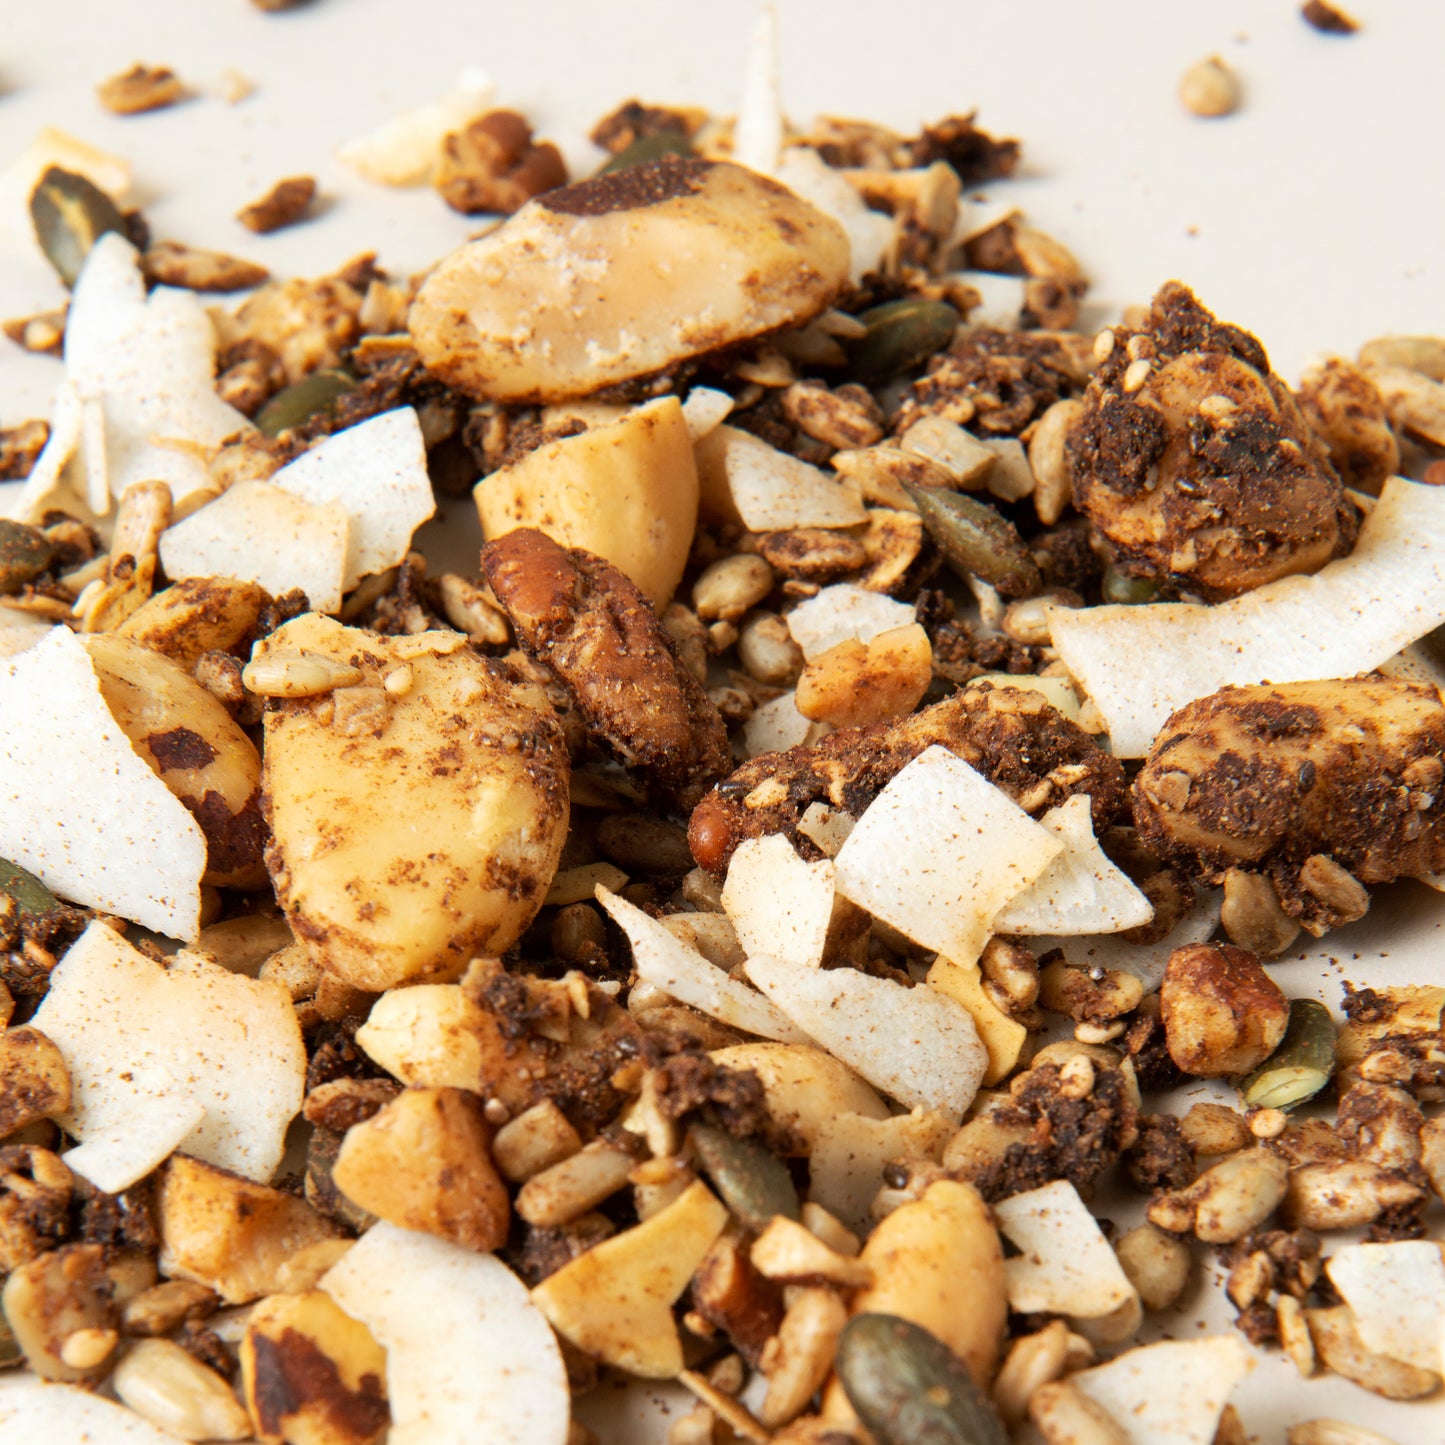 Keto granola - basic pure nuts and seeds raw